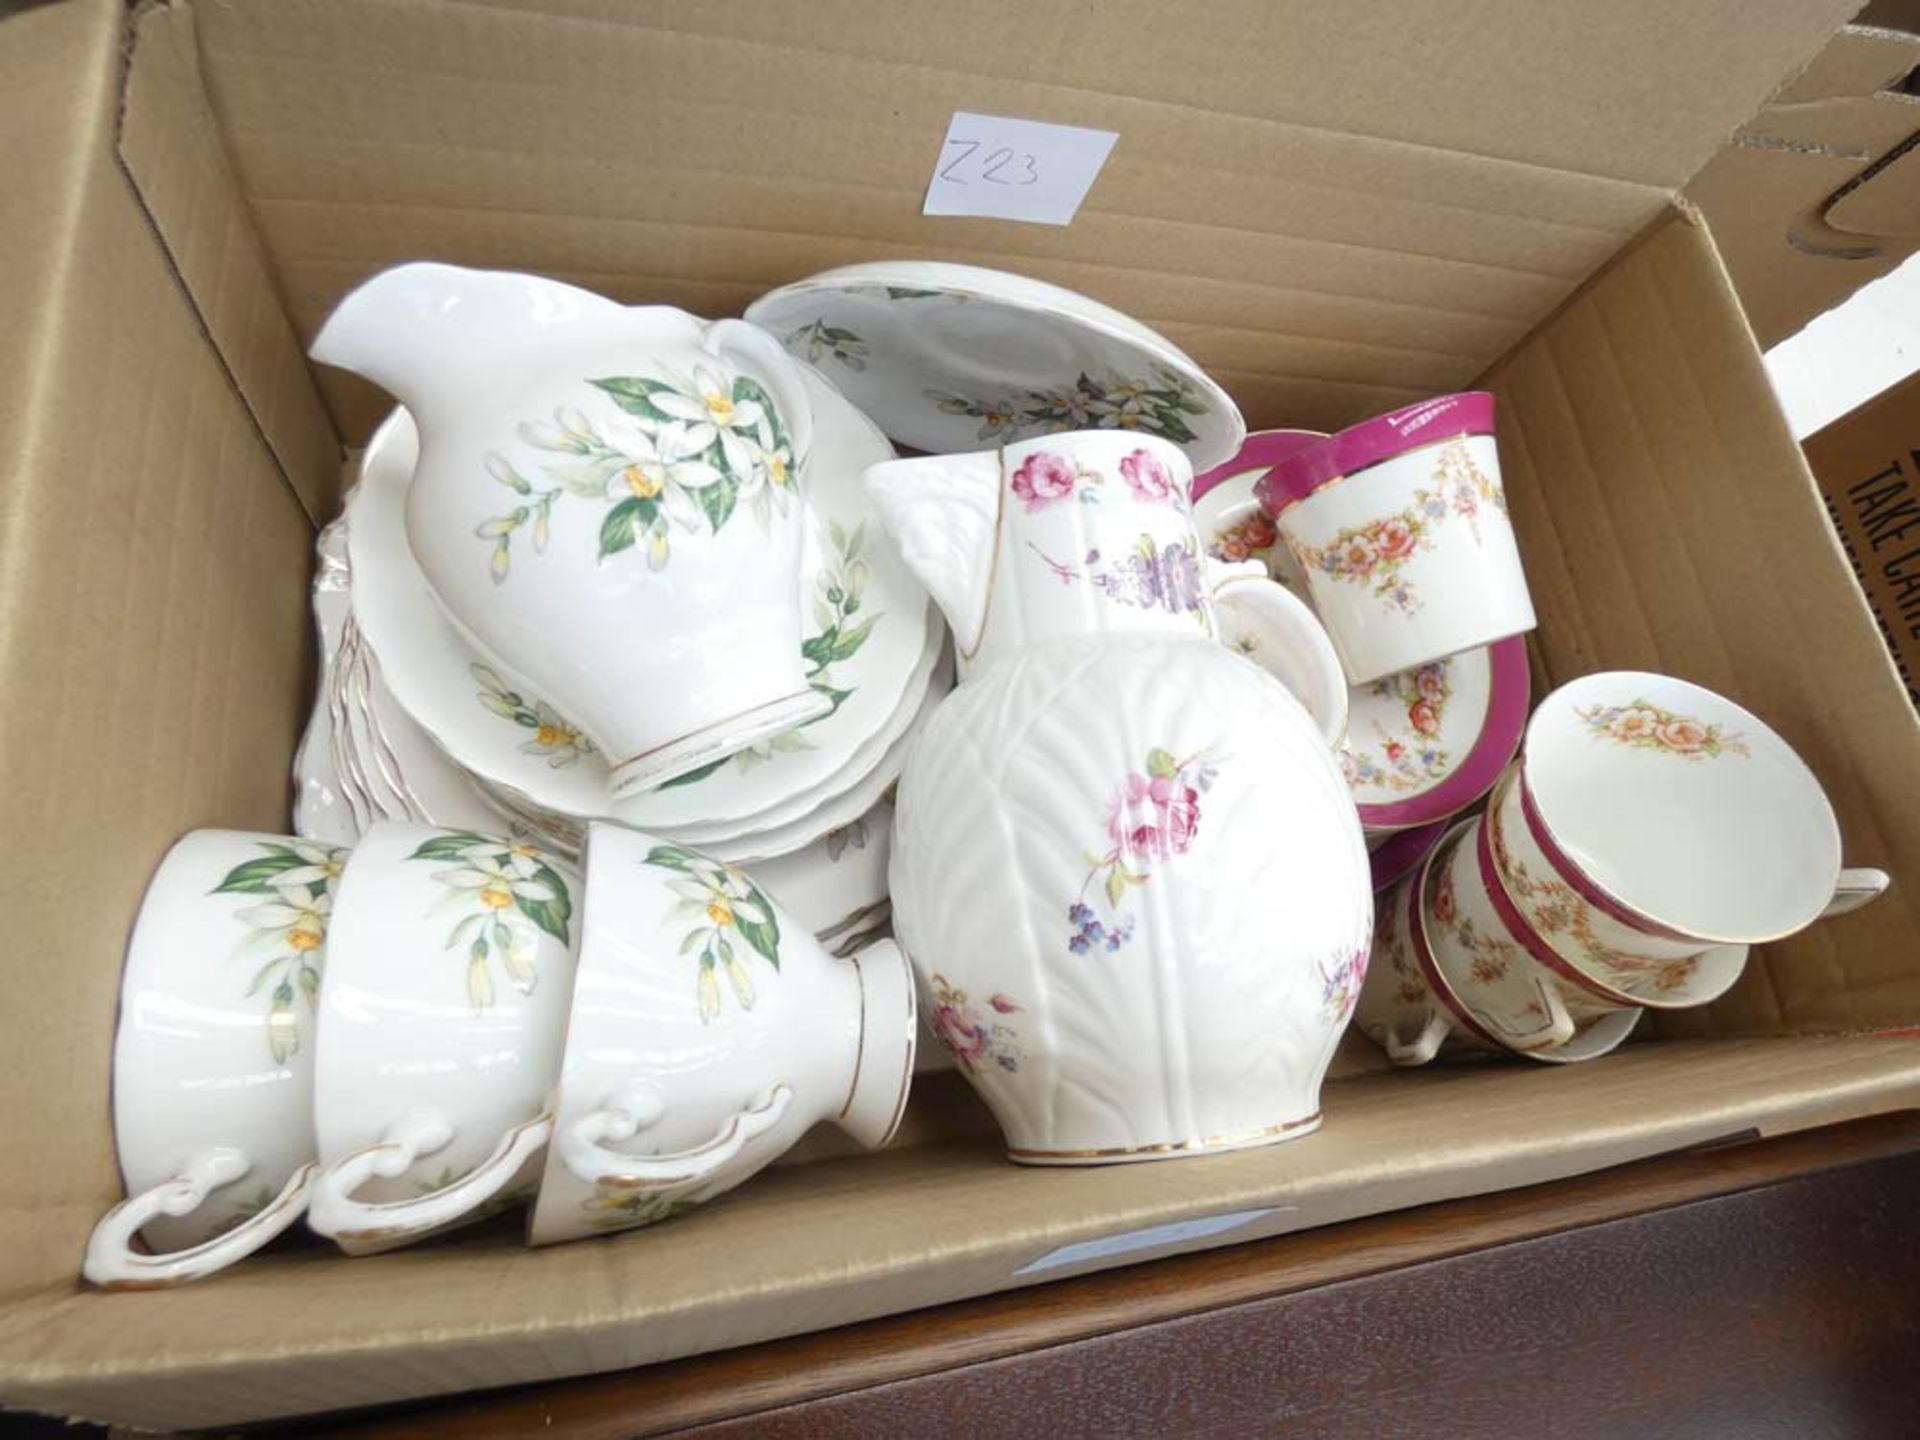 Box containing tusk and floral patterned china